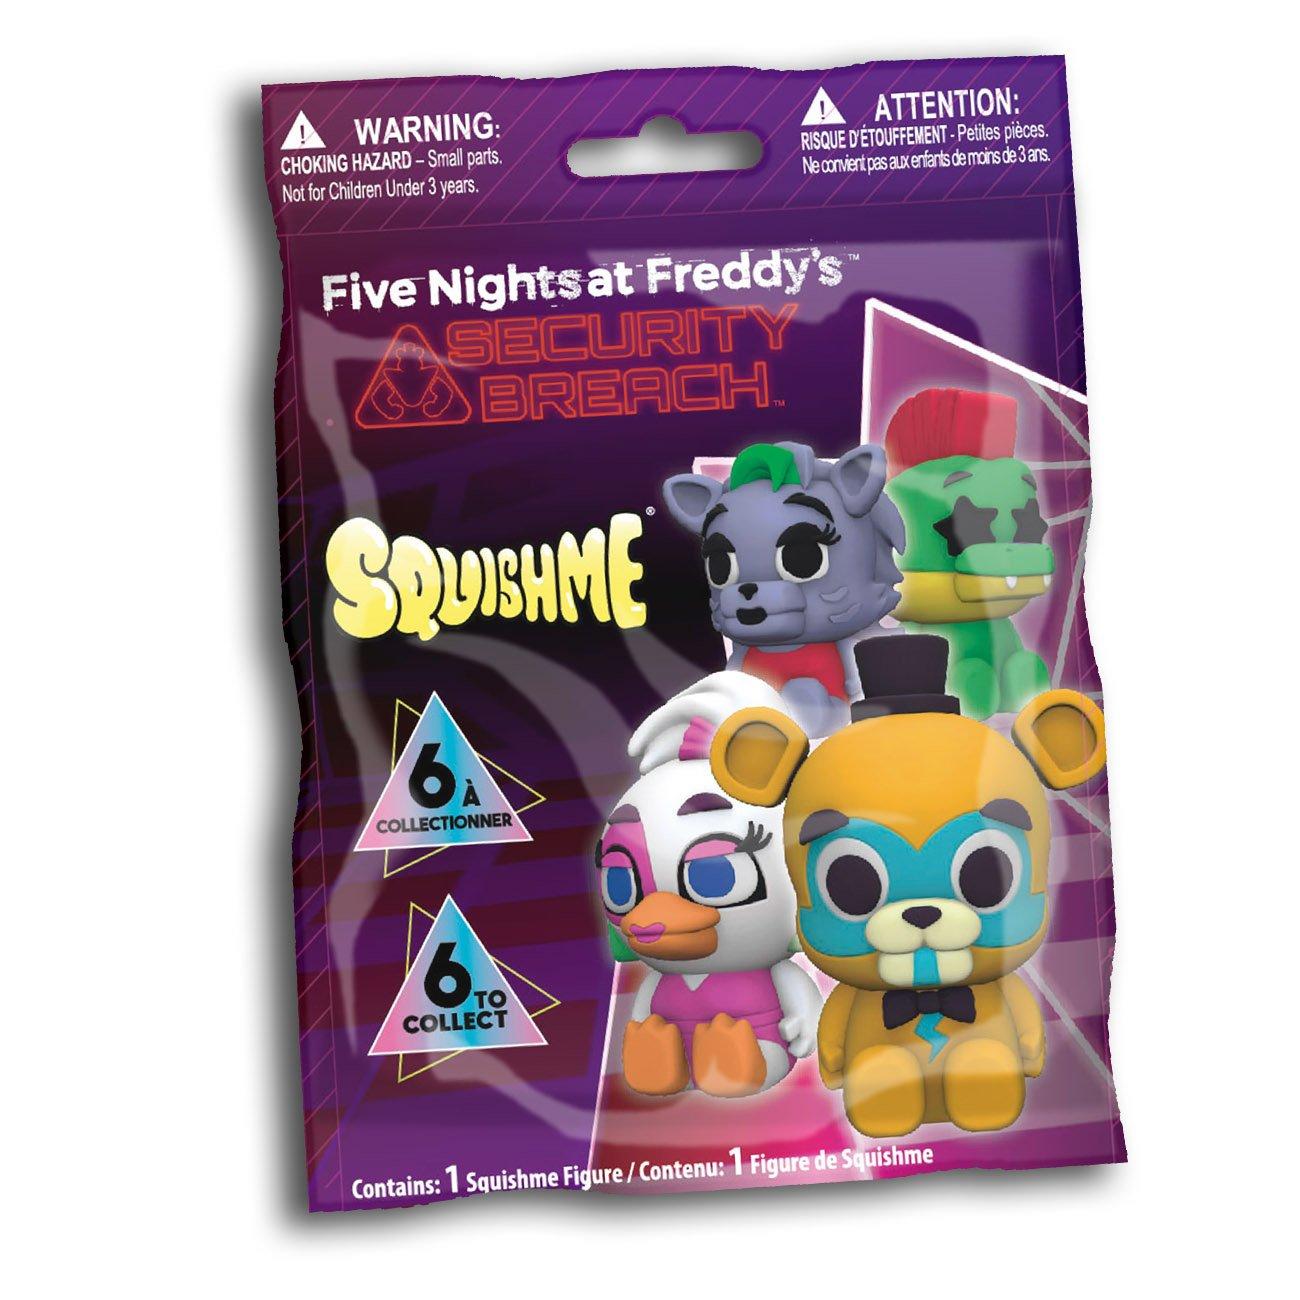 https://media.gamestop.com/i/gamestop/11200494_ALT06/Just-Toys-Five-Nights-at-Freddys-Security-Breach-SquishMe-Figures-Blind-Box?$pdp$